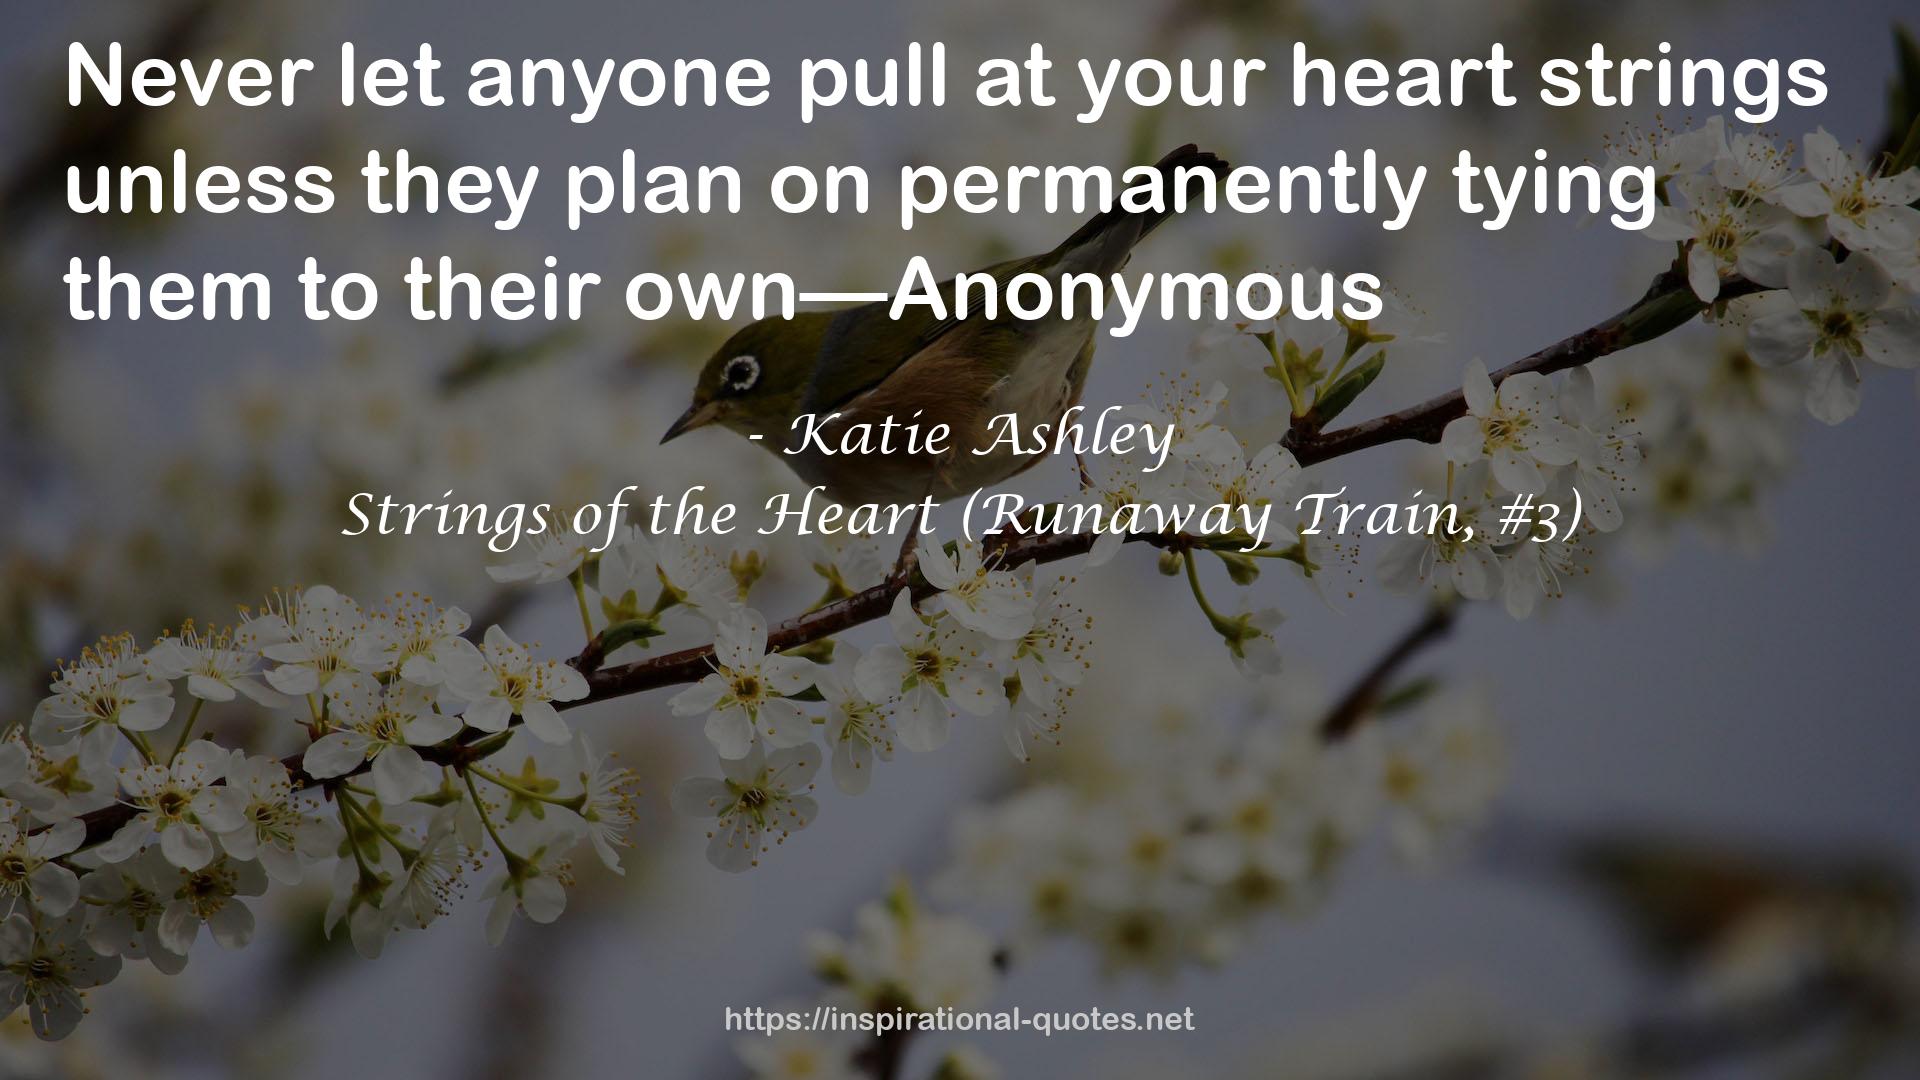 Strings of the Heart (Runaway Train, #3) QUOTES